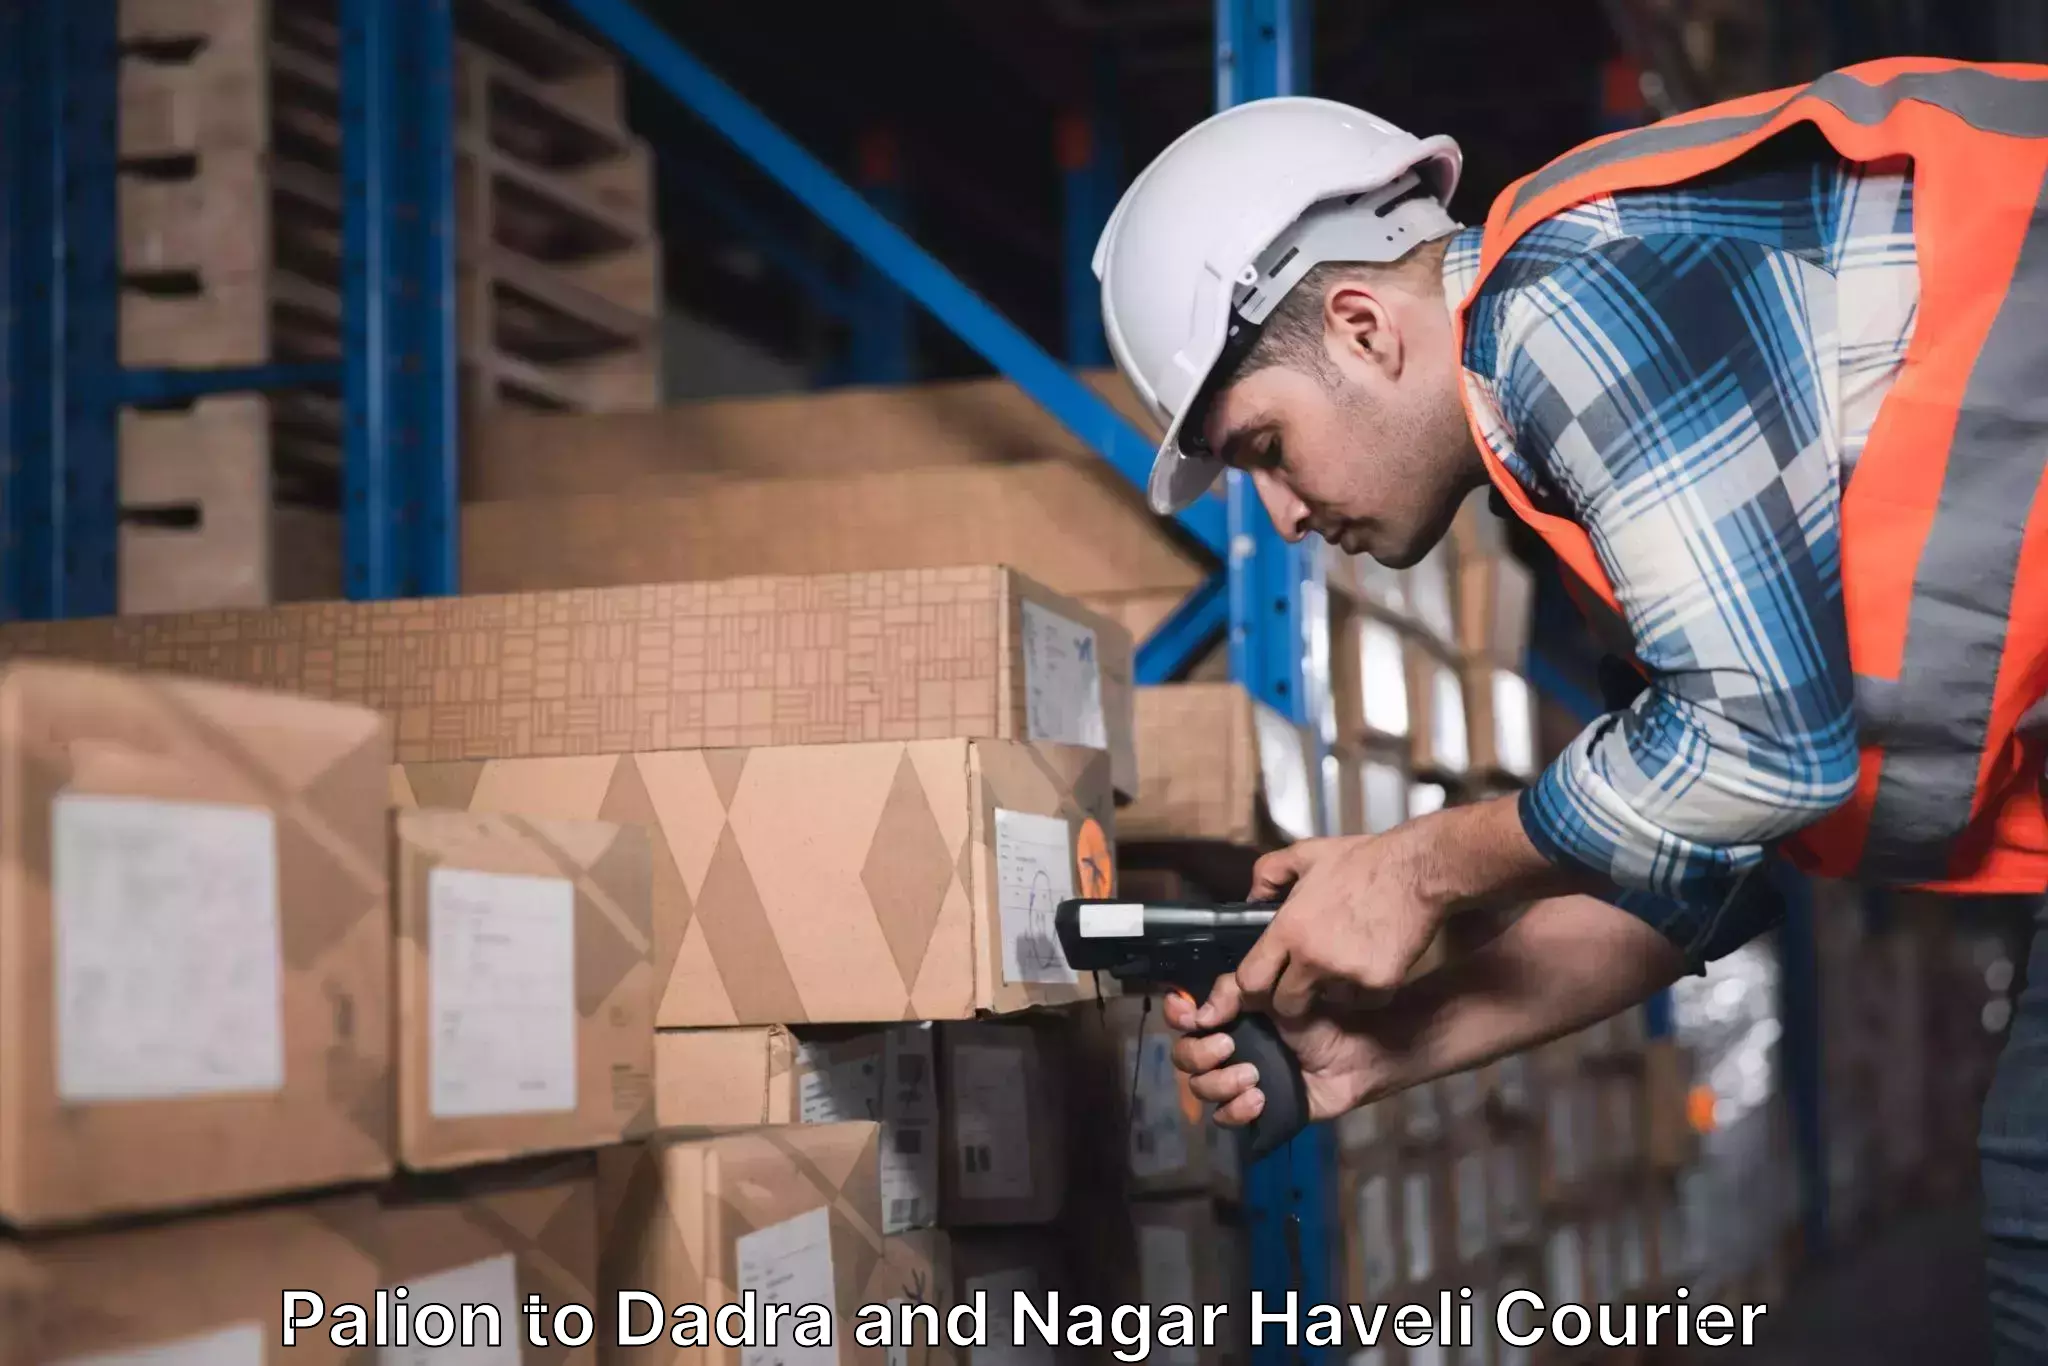 Multi-national courier services Palion to Silvassa